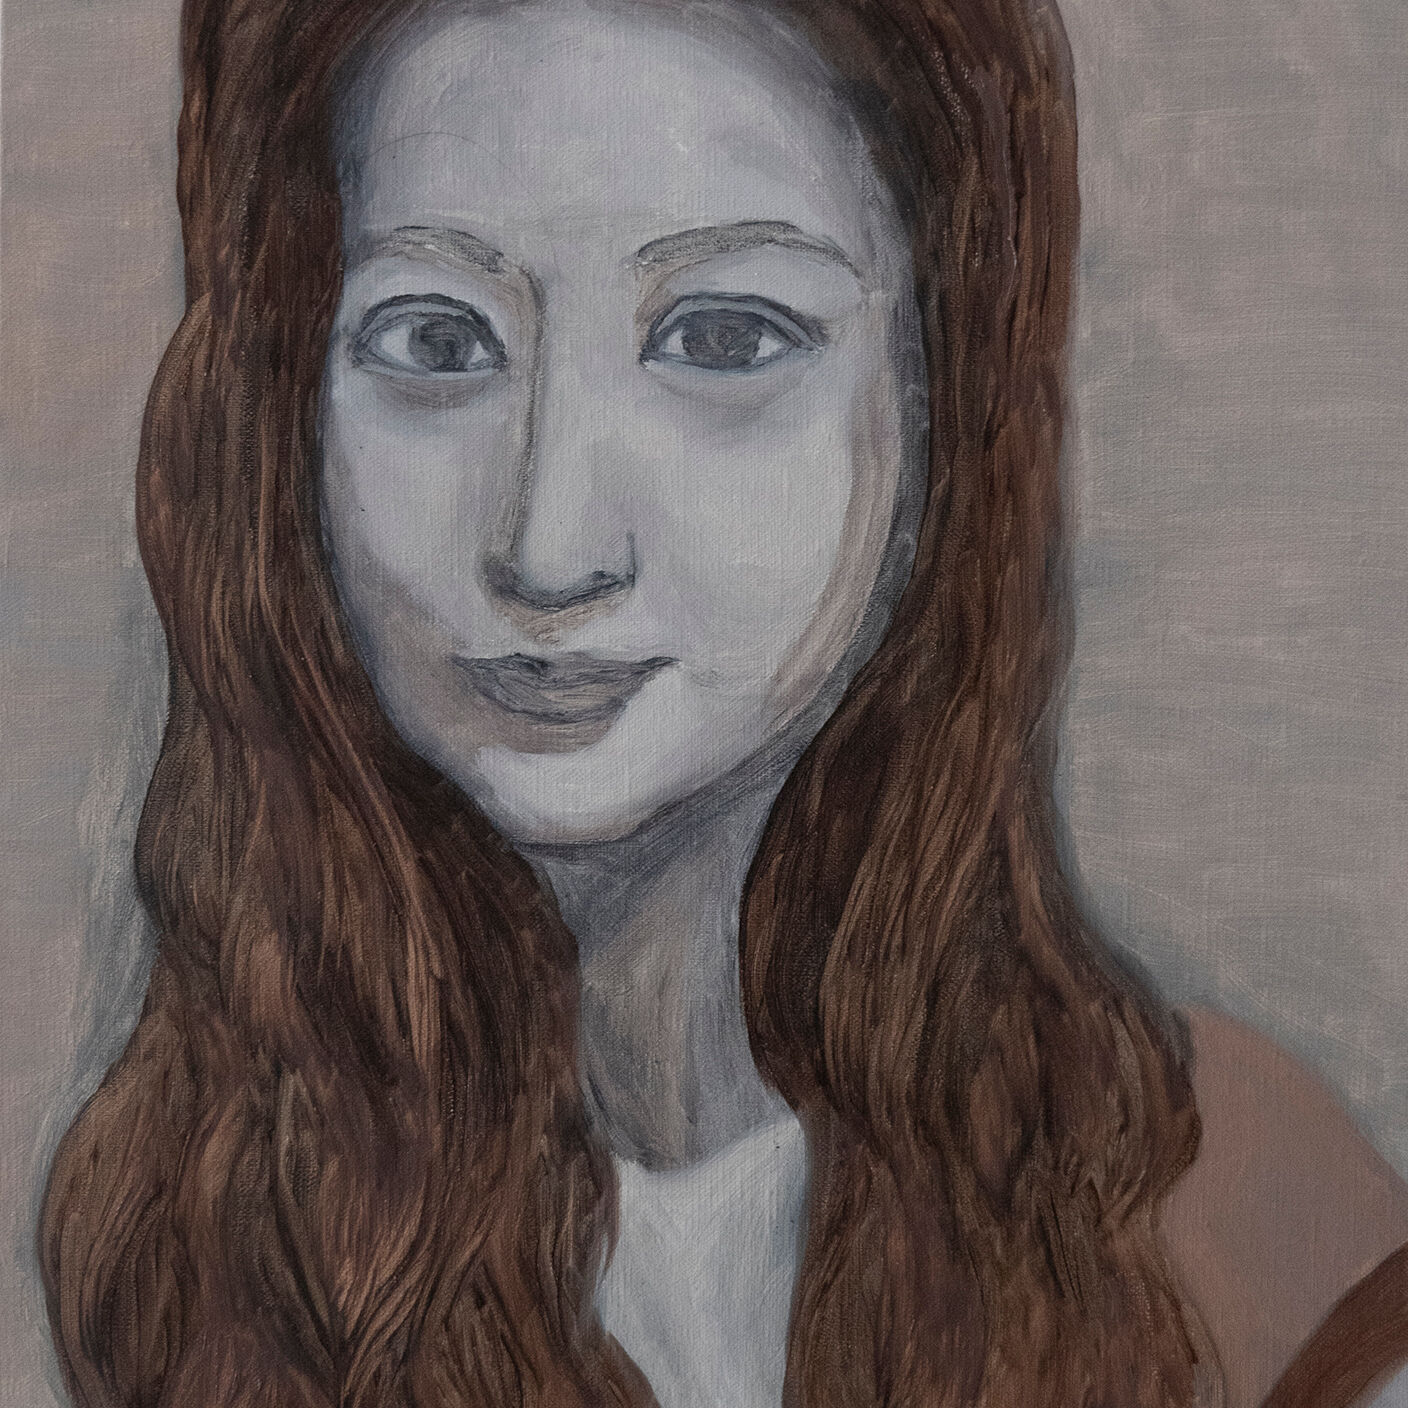 In the lockdown period, Lihong started her first self portrait painting.​